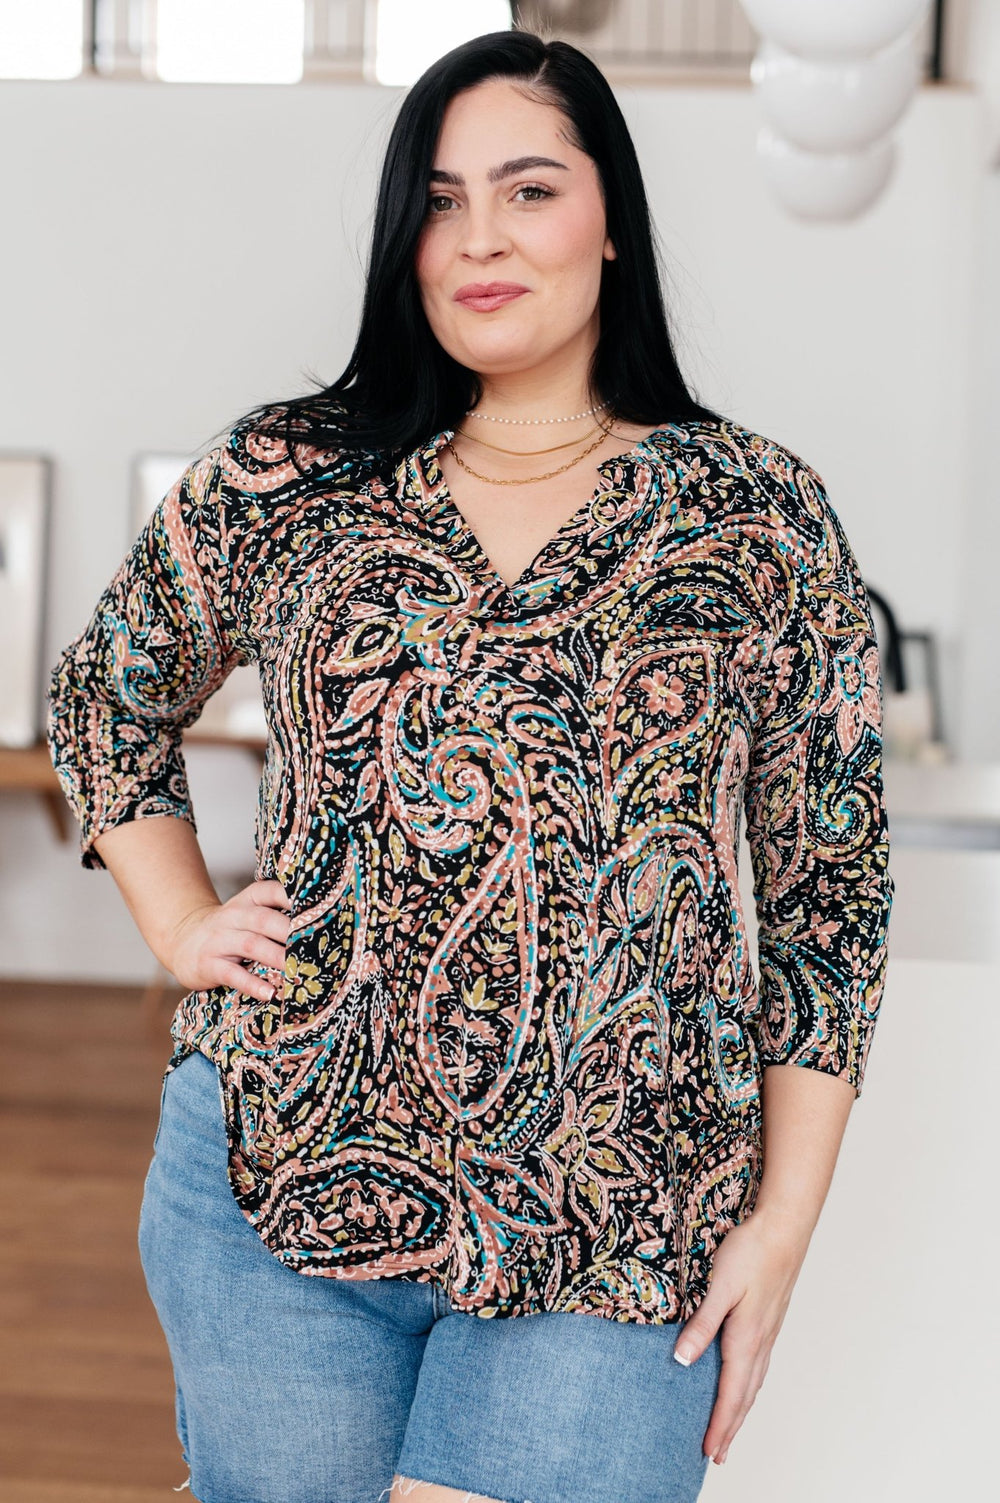 I Think Different Top Teal Paisley - AS7704-01 - Love it Curvy